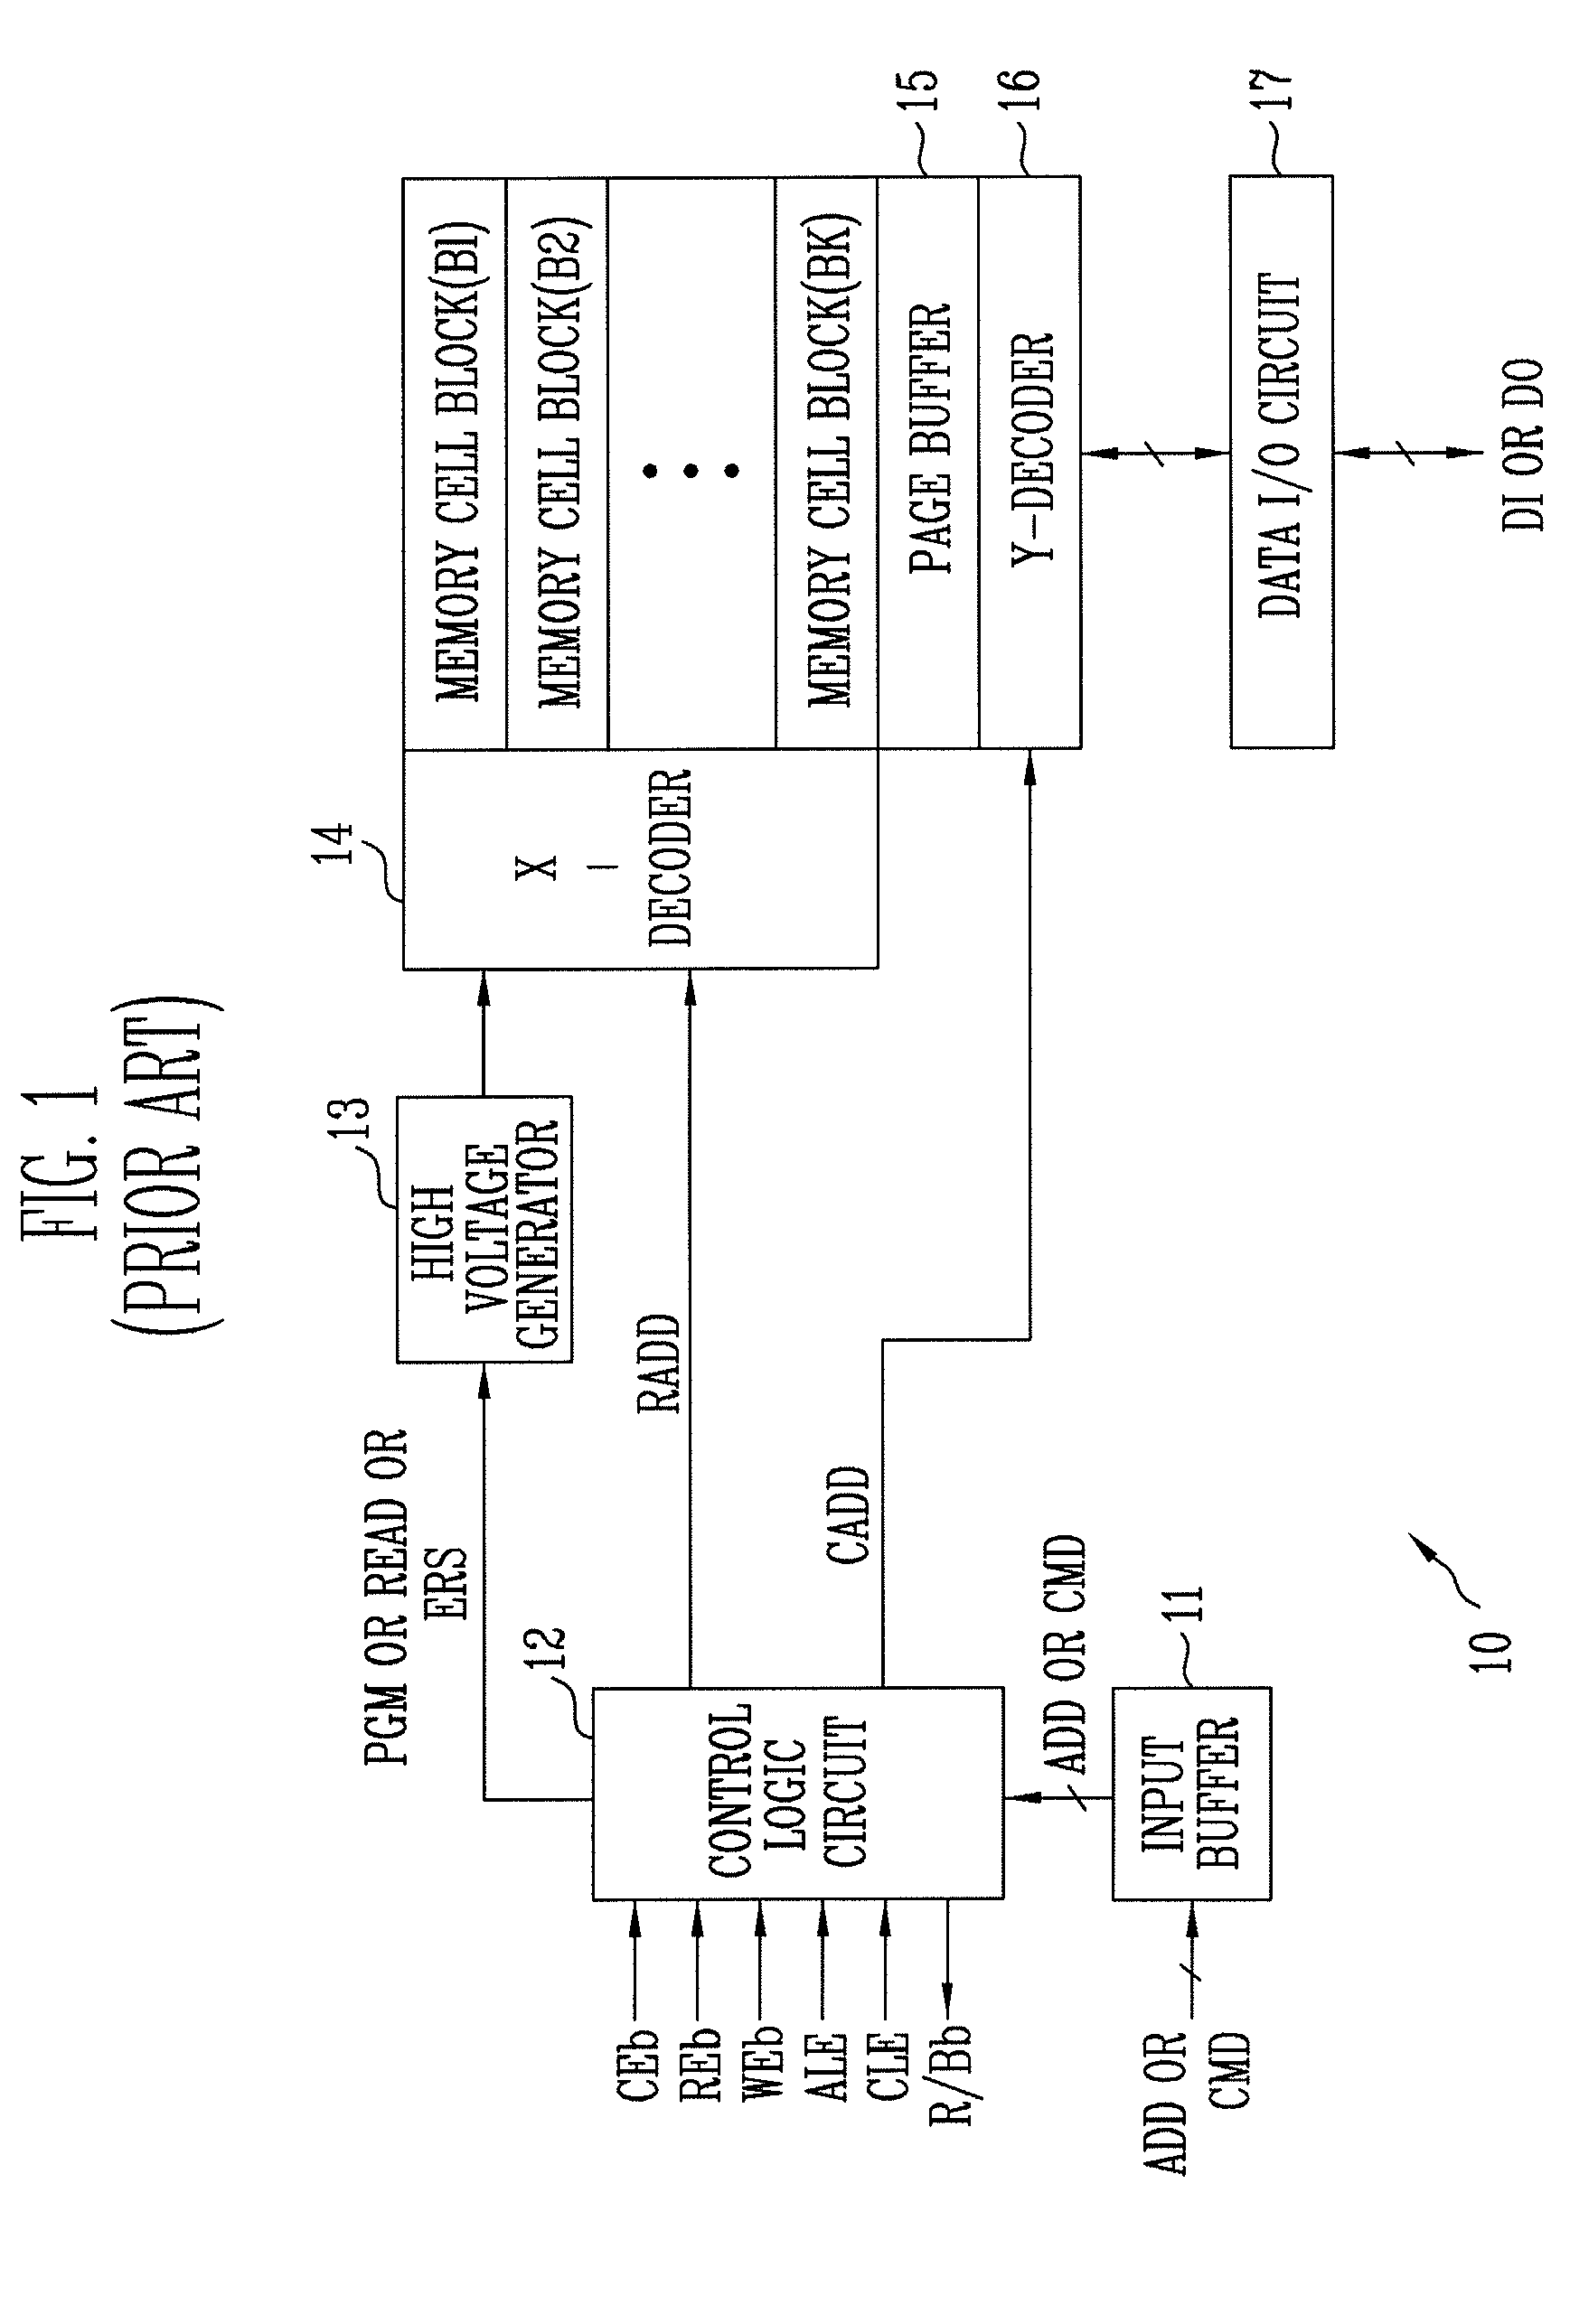 Multi-plane type flash memory and methods of controlling program and read operations thereof